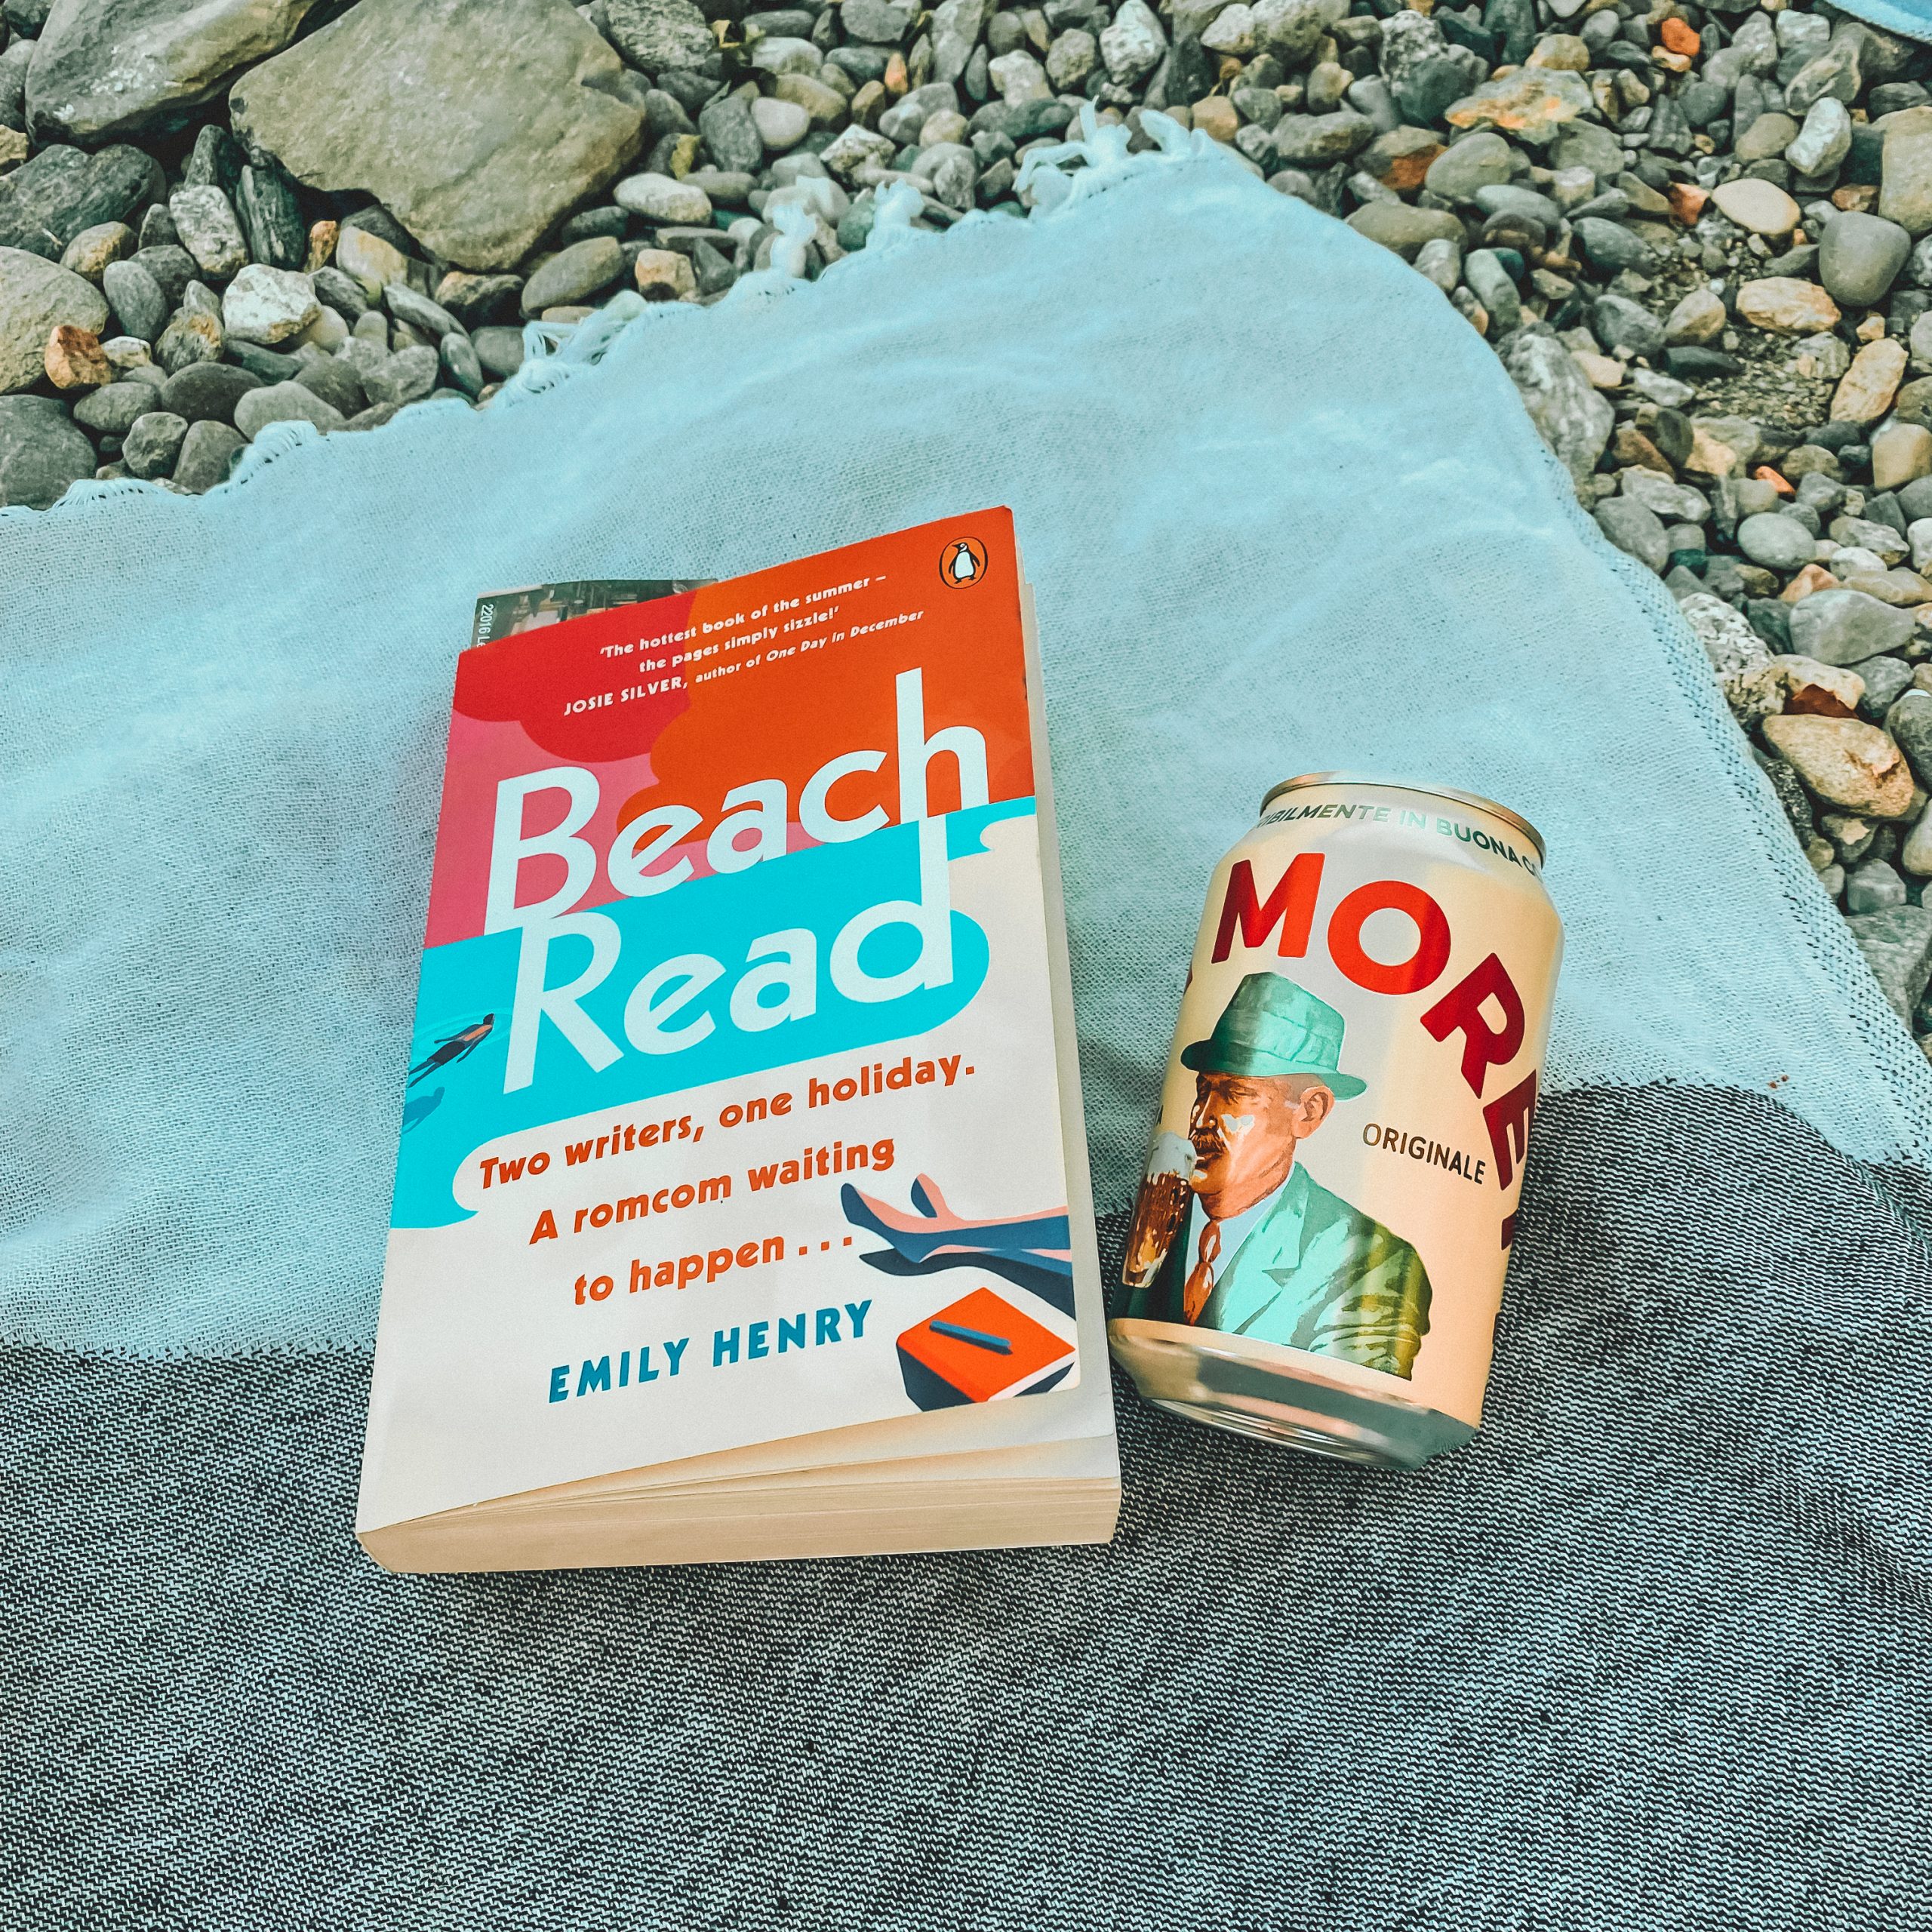 A book and a can of moretti beer on a blue beach towel on a pebble beach.